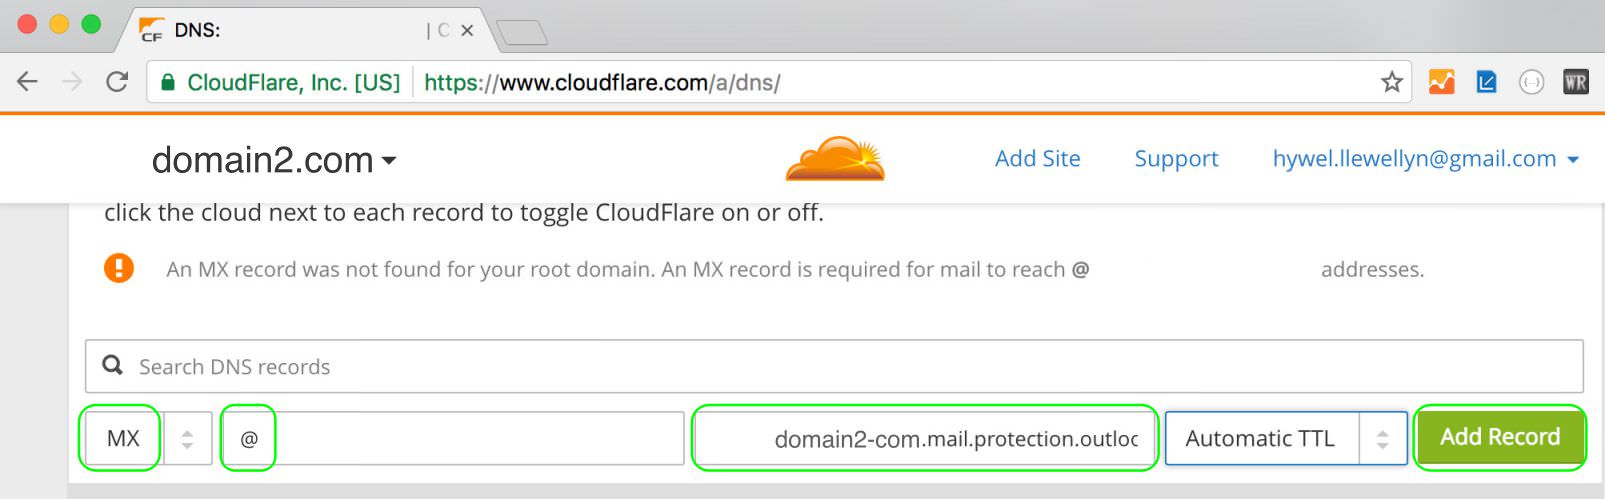 4.4 Click Add Record to add the MX record to CloudFlare